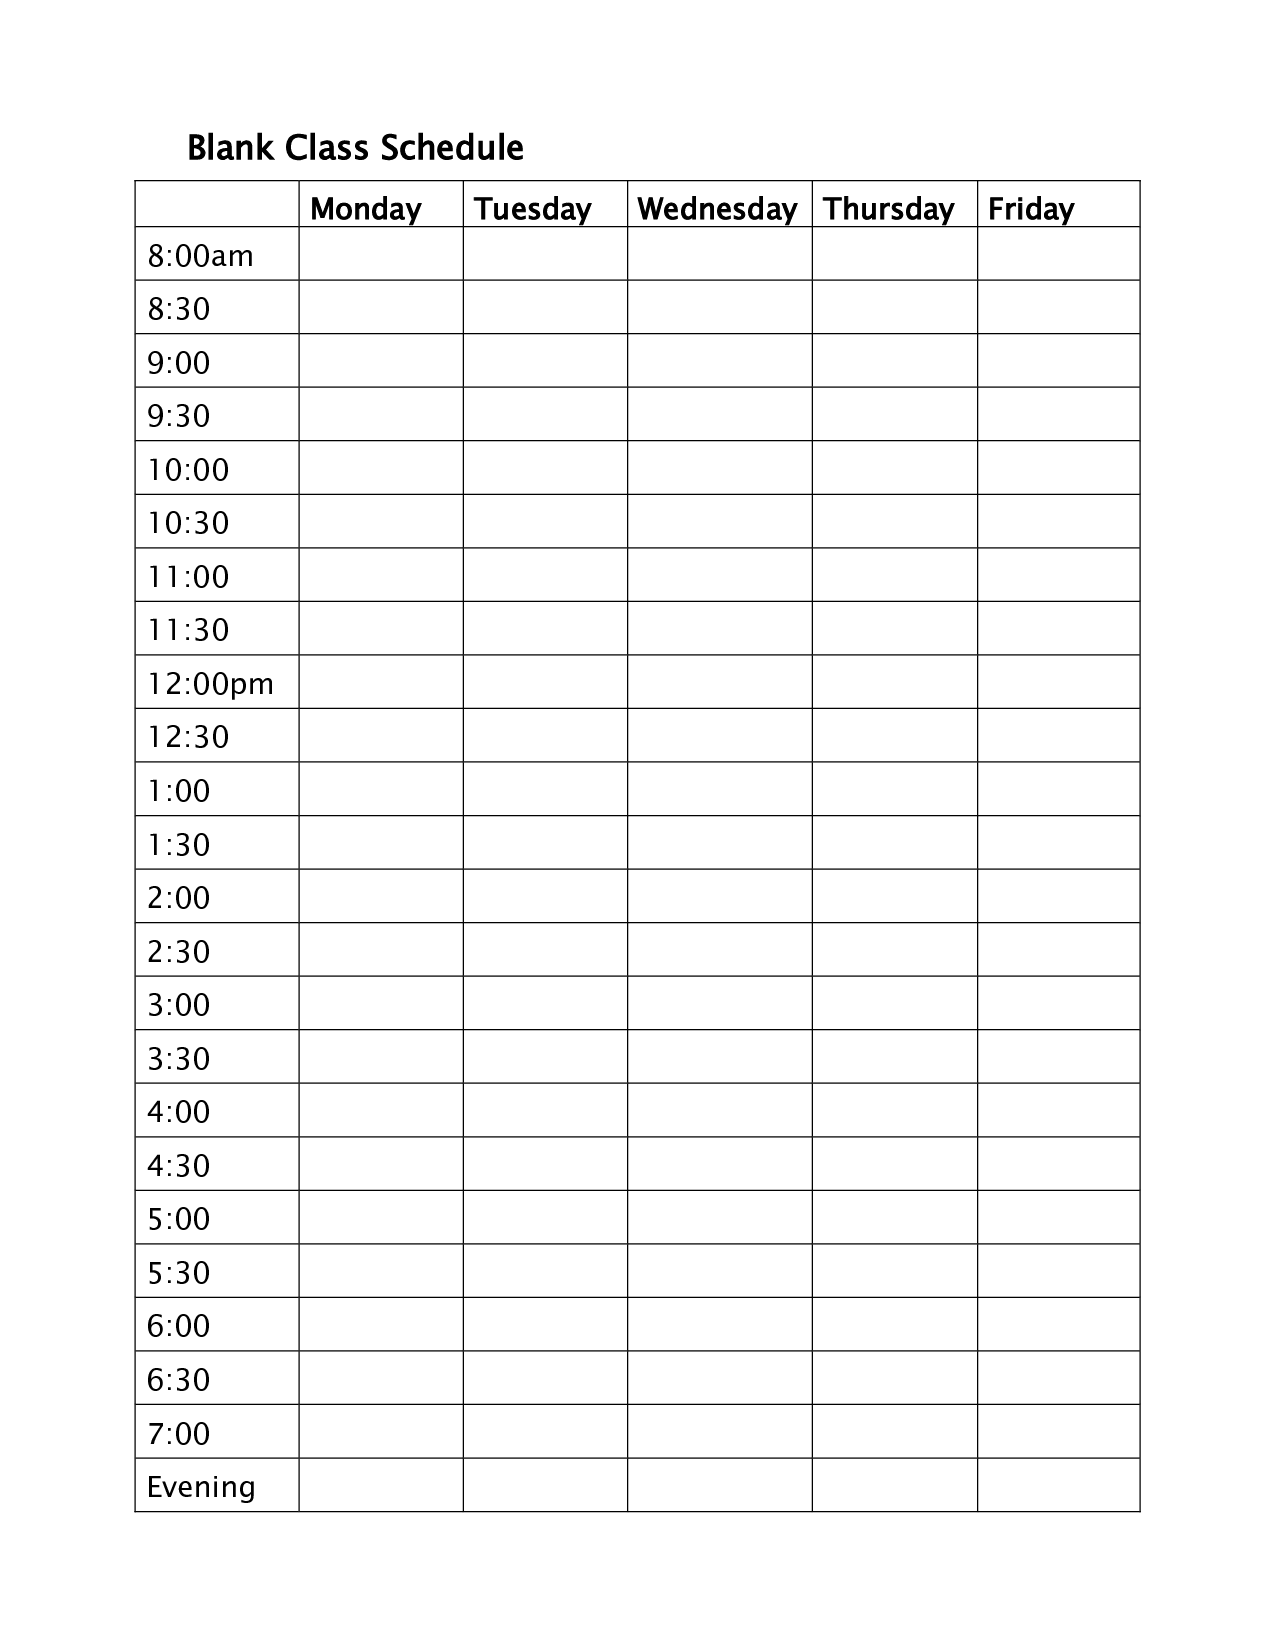 daily schedule template printable free kids